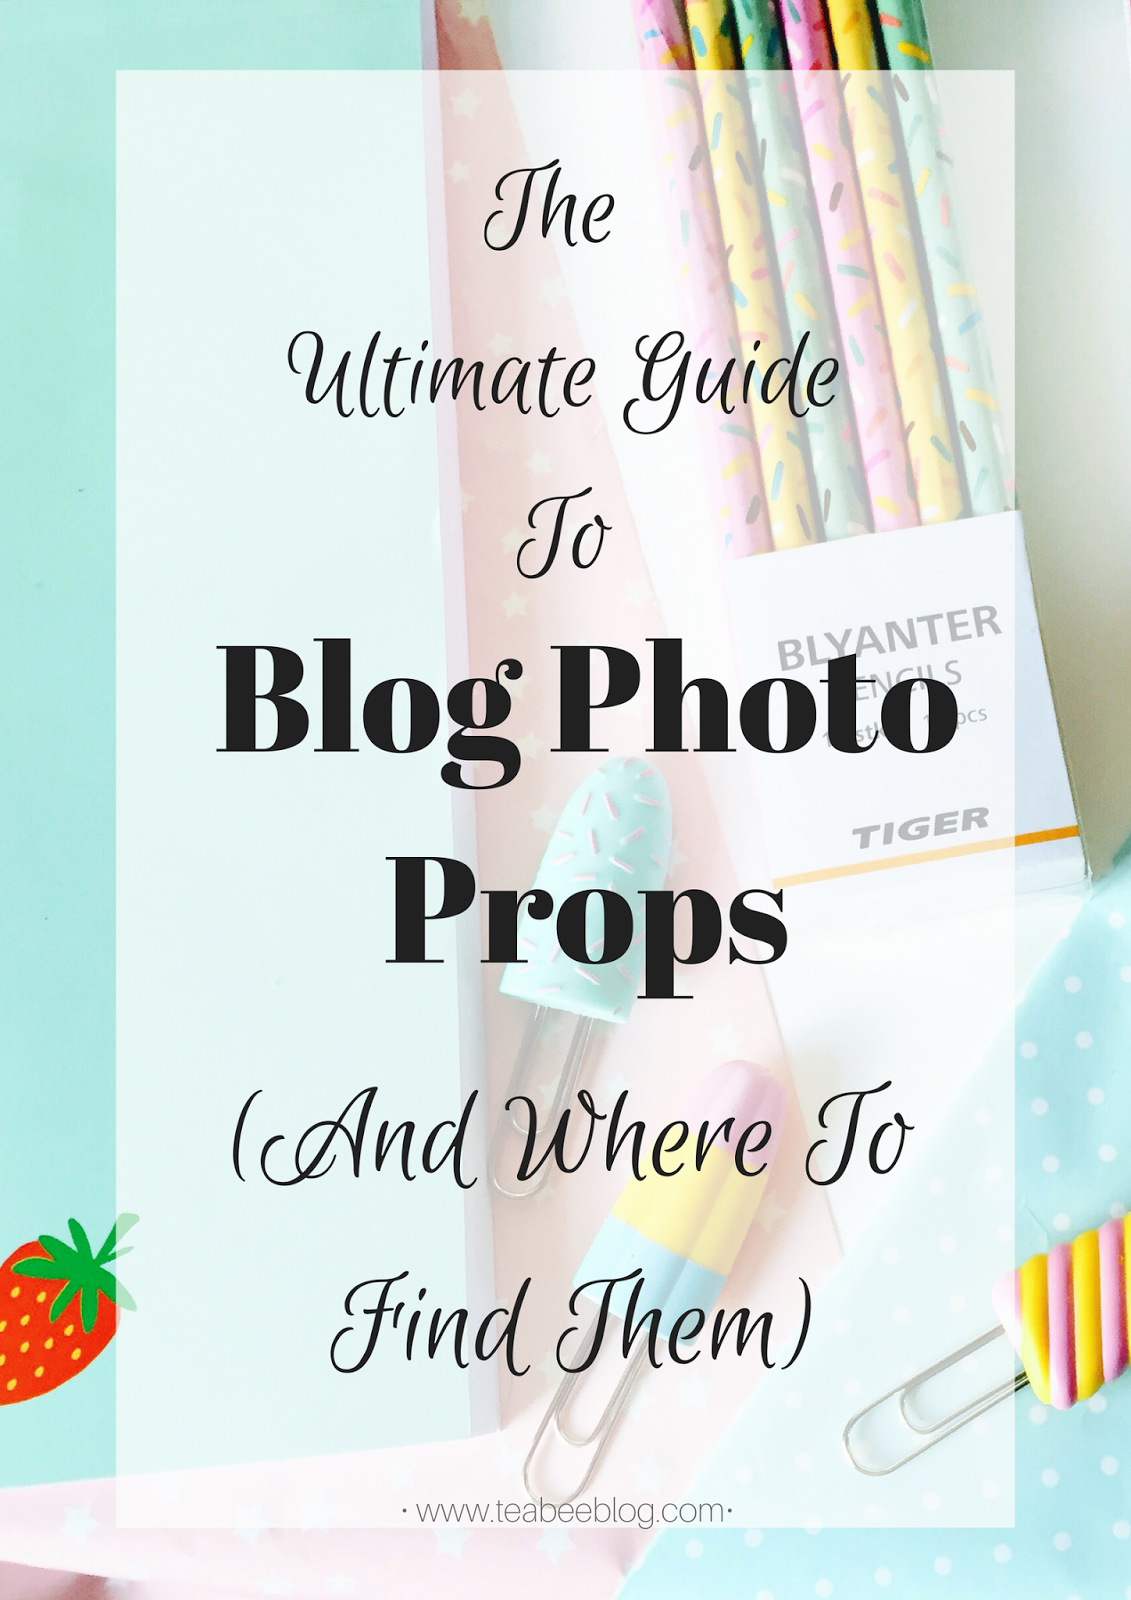 The Ultimate Guide To Blog Photo Props And Where To Find Them